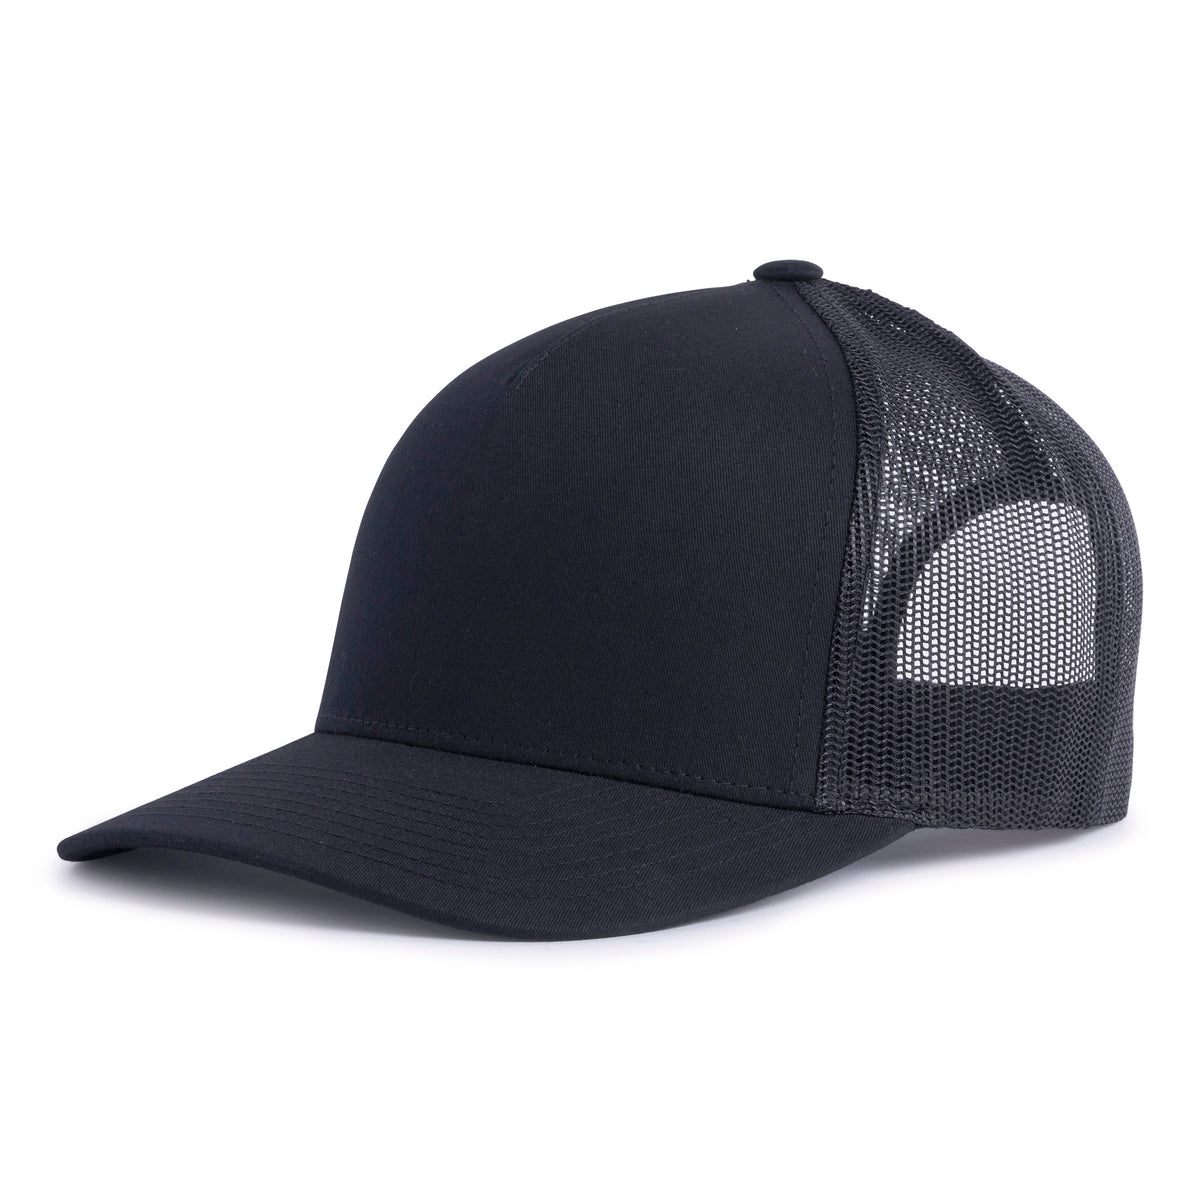 Black trucker hat with a curved bill, 5-panels, structured mid-high crown, black mesh back, and a snapback closure from Tailgate Hats.